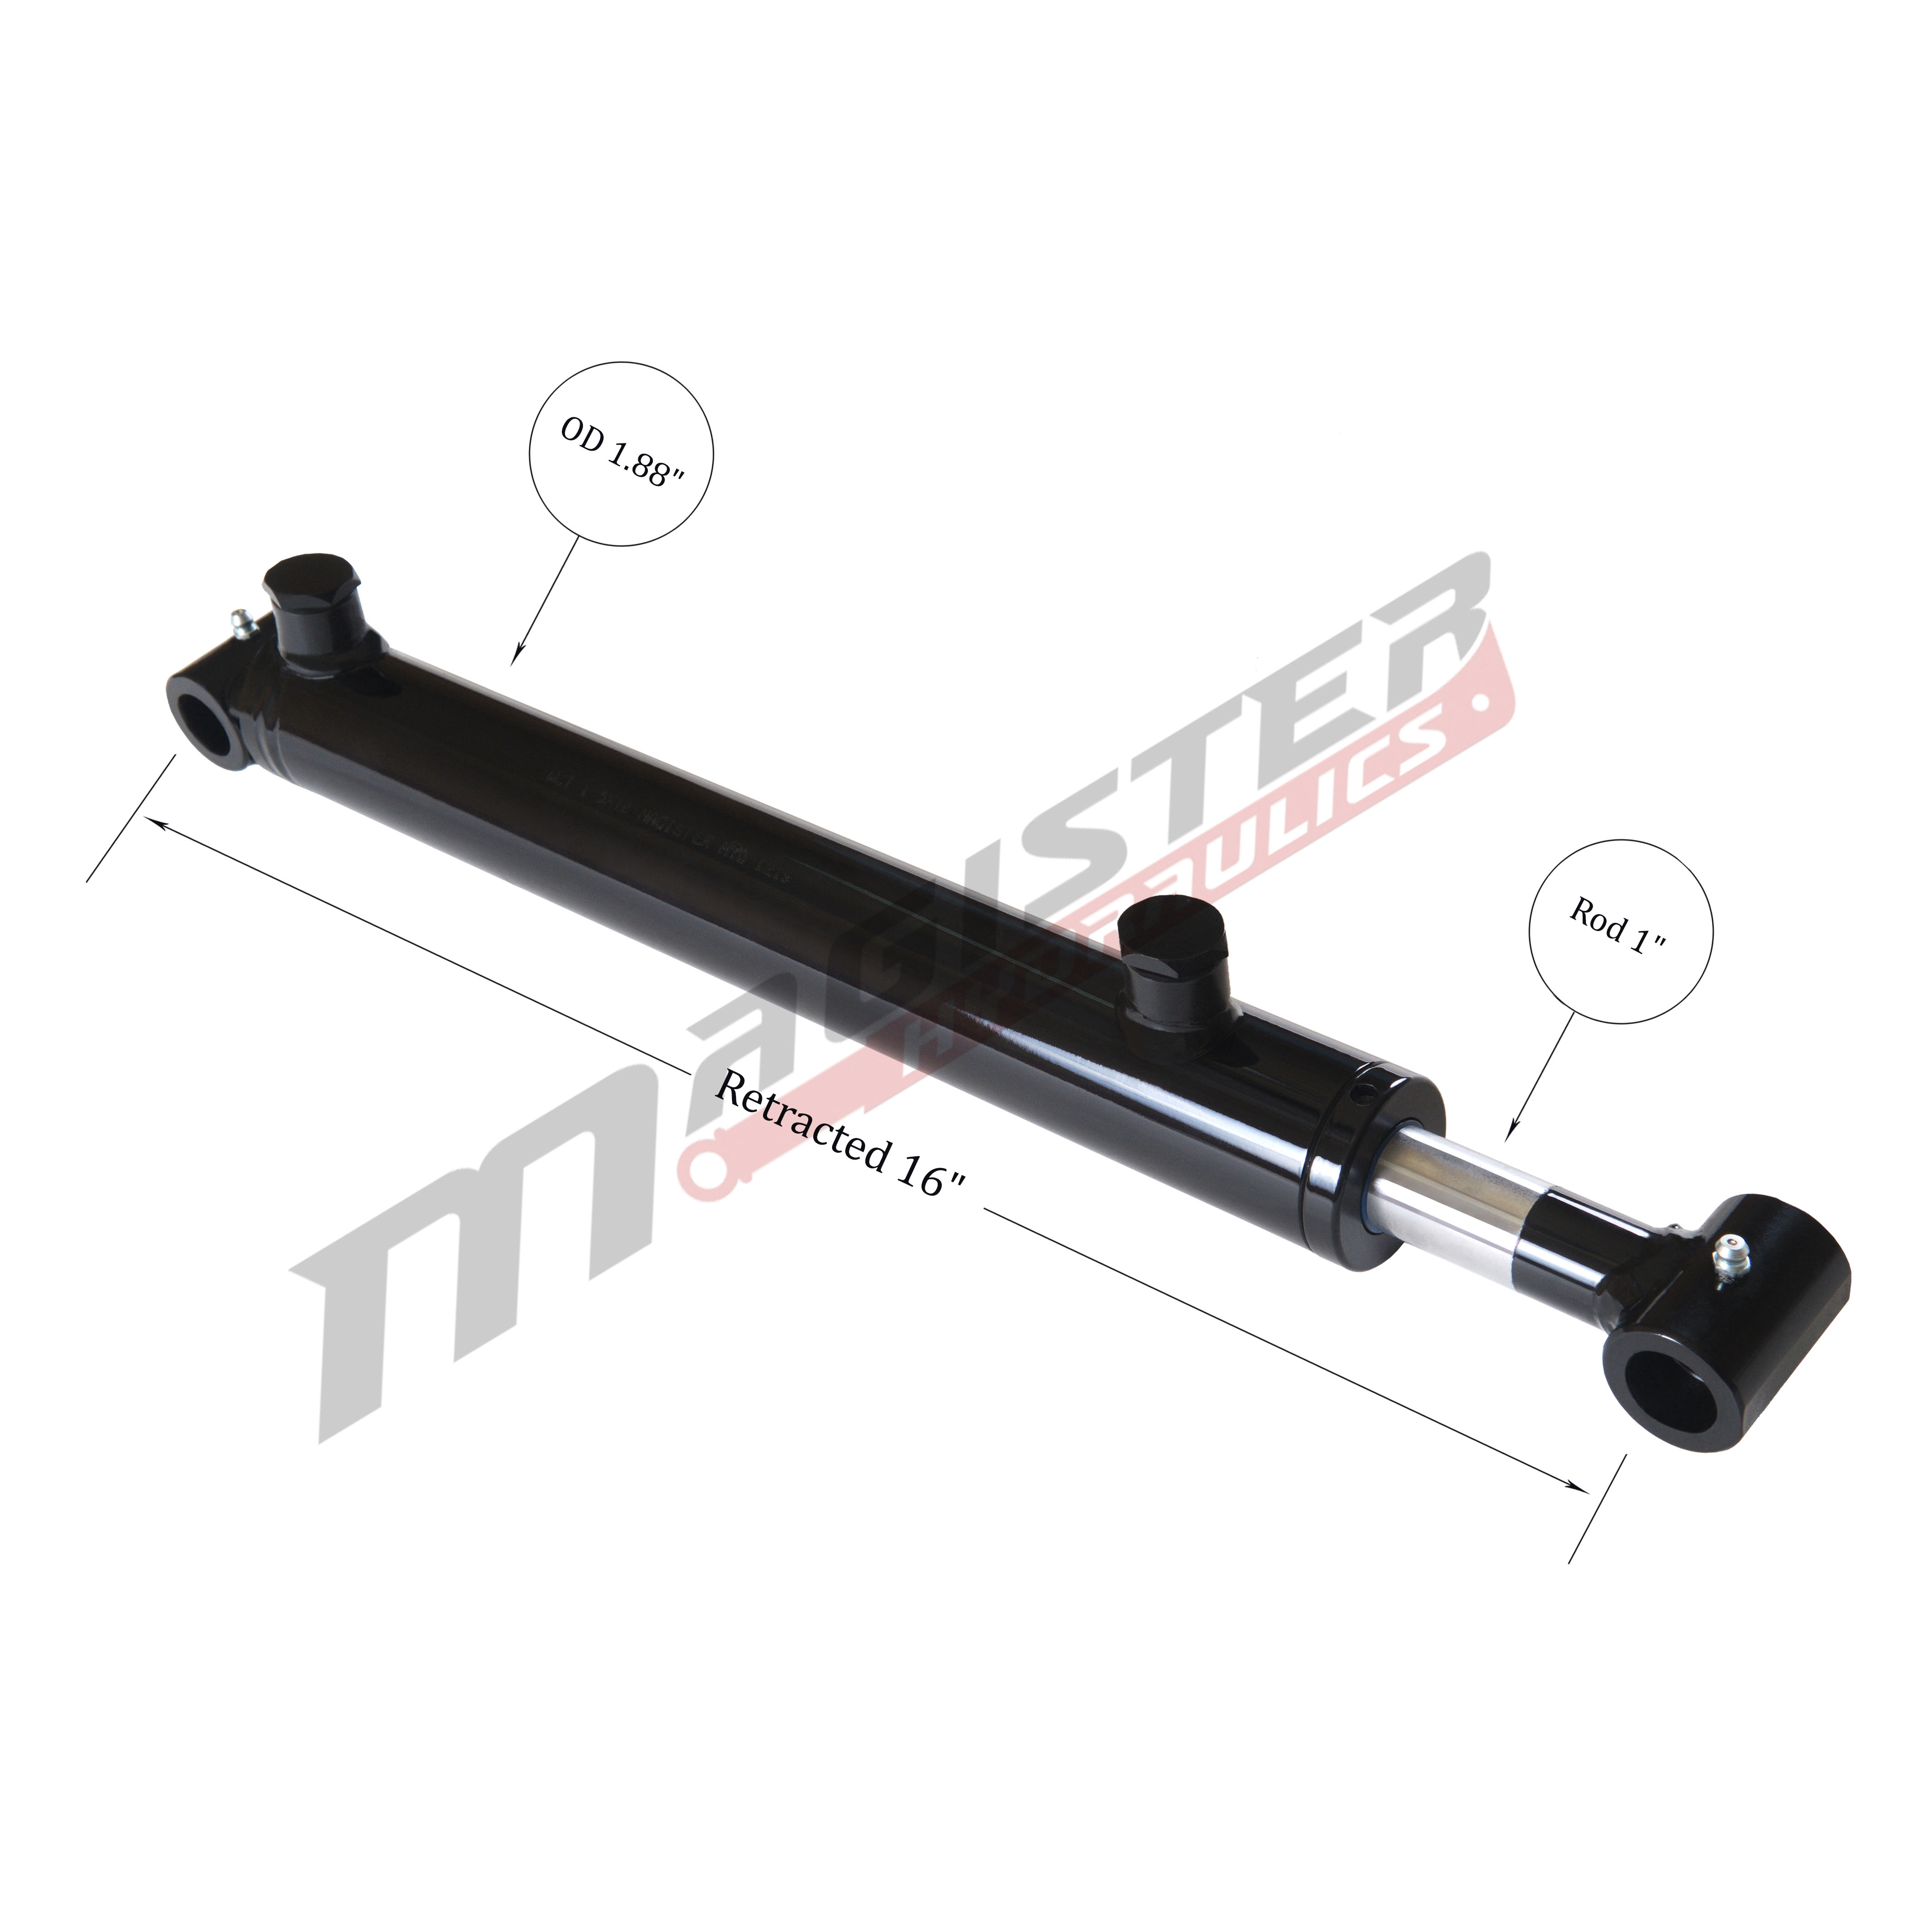 1.5 bore x 8 stroke hydraulic cylinder, welded cross tube double acting cylinder | Magister Hydraulics